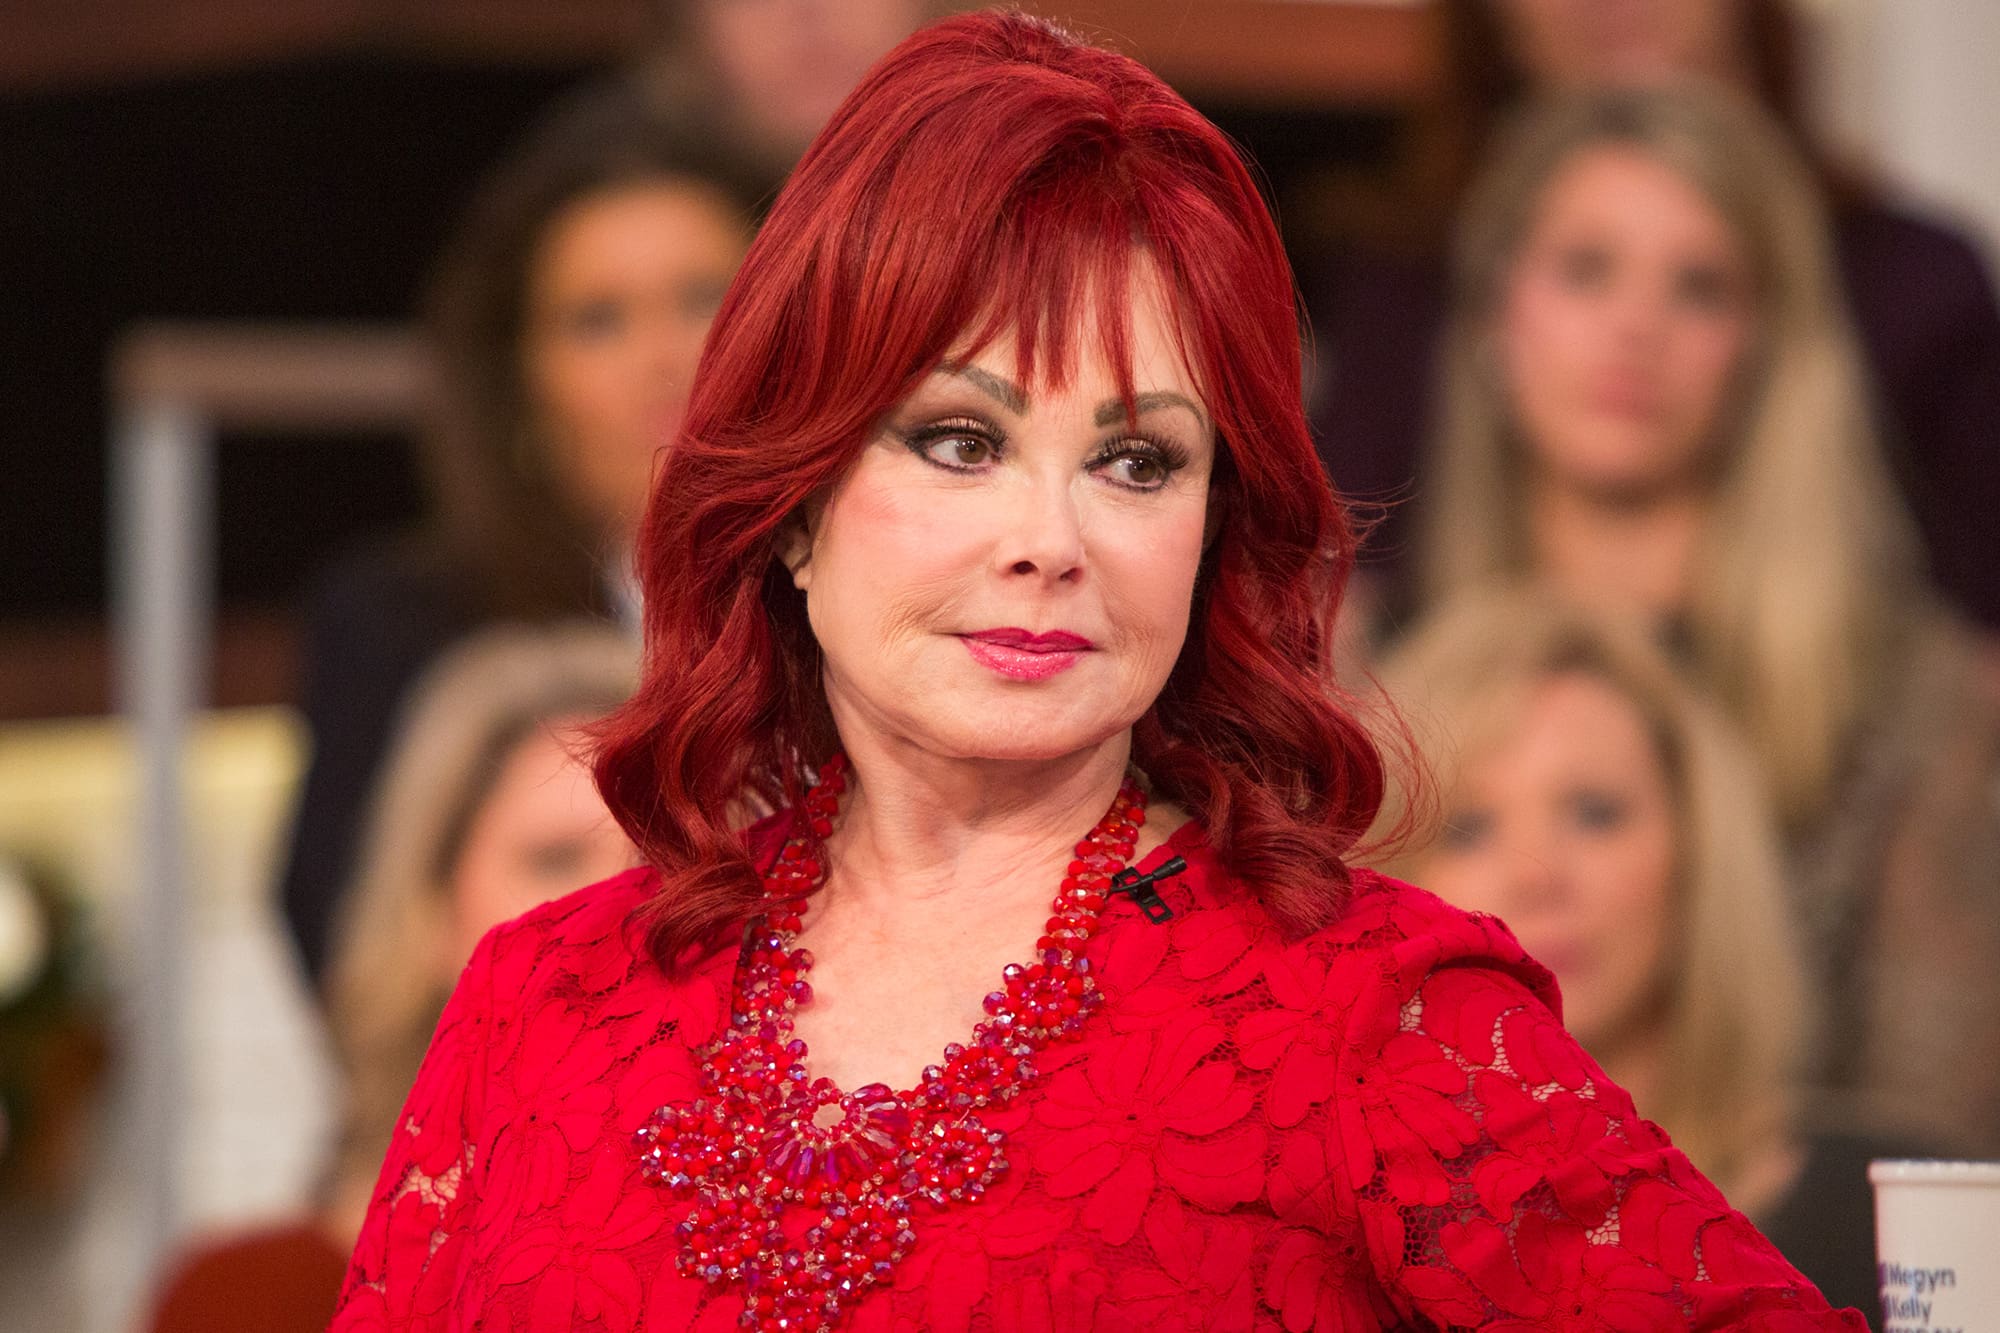 Wynonna Judd And Ashley Judd Have Been Excluded From The Will Of Naomi Judd